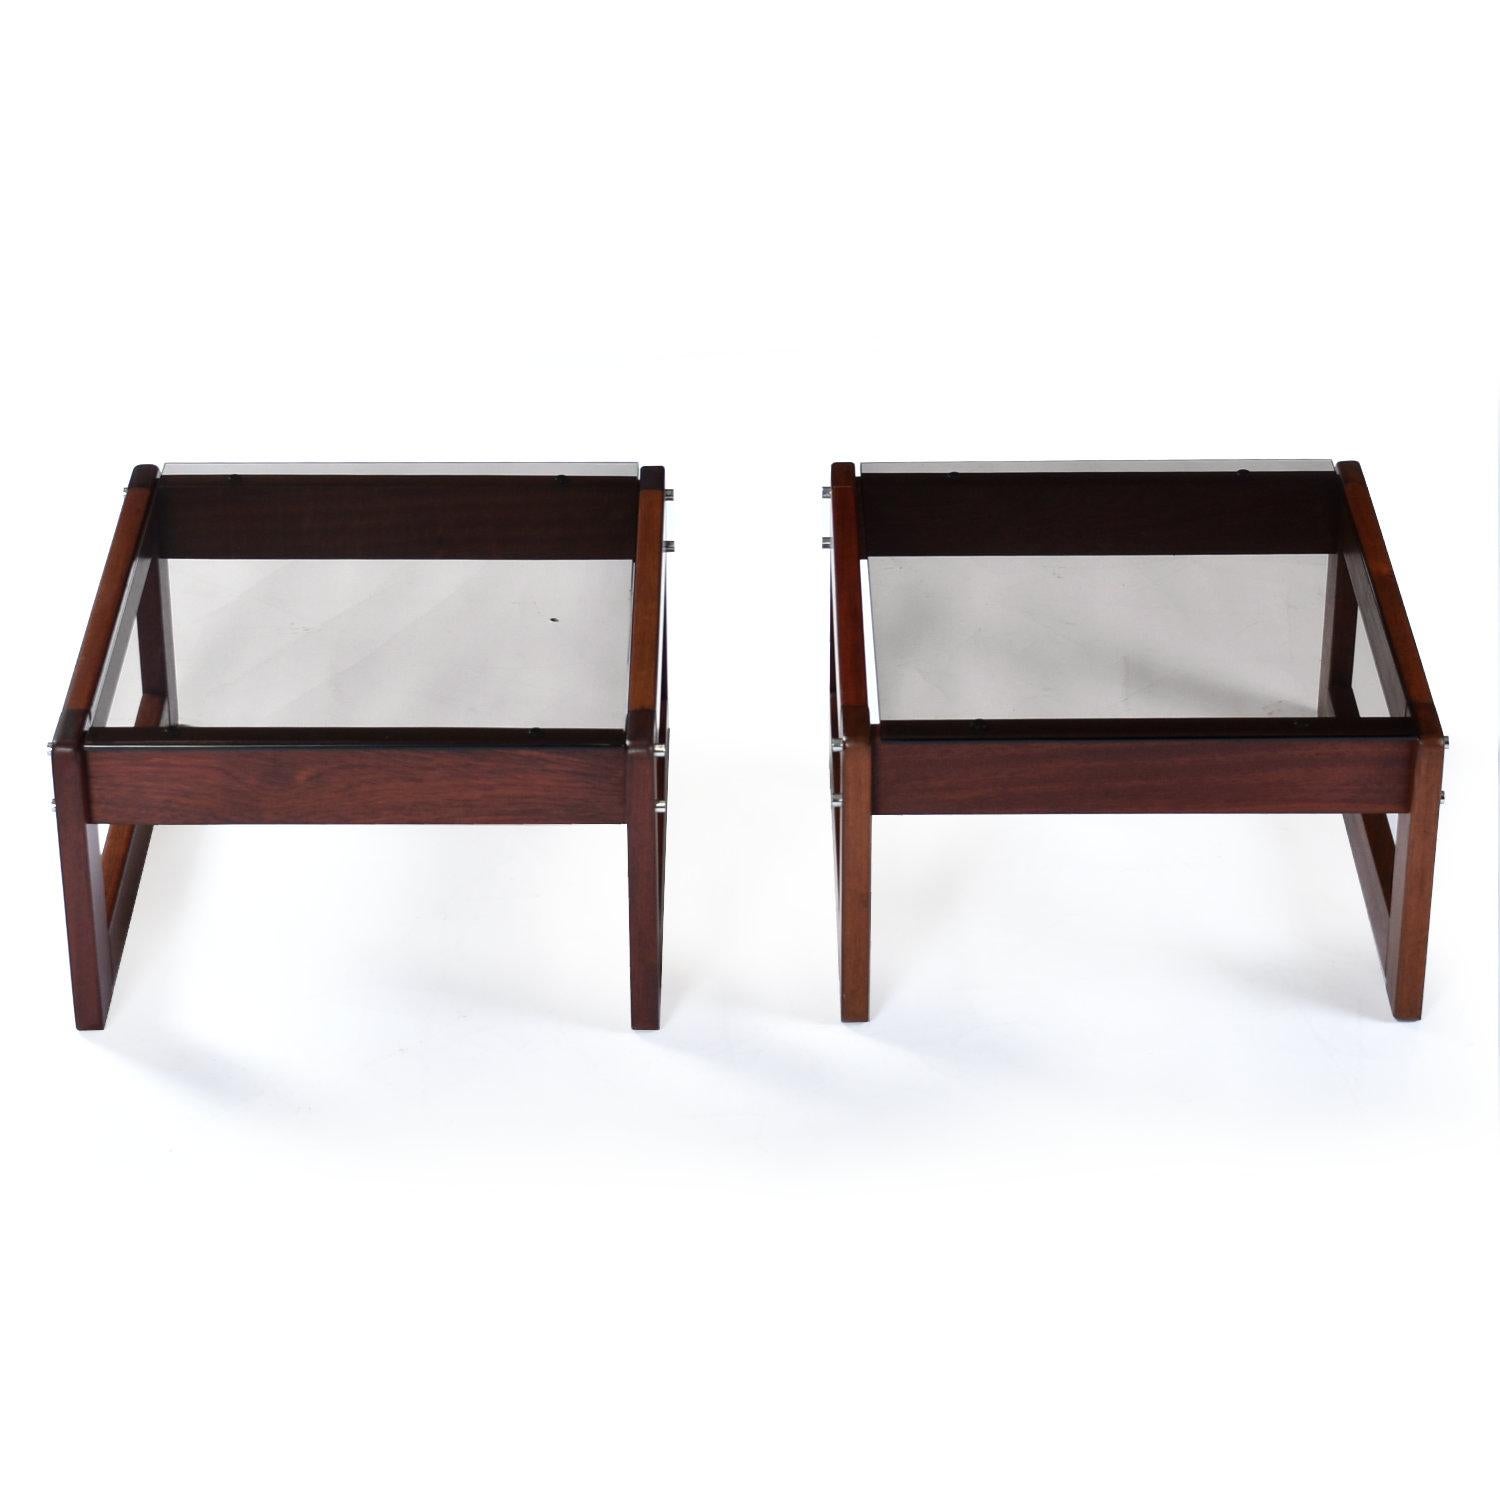 Late 20th Century Percival Lafer Smoked Glass Top Brazilian Modern Rosewood End Tables For Sale